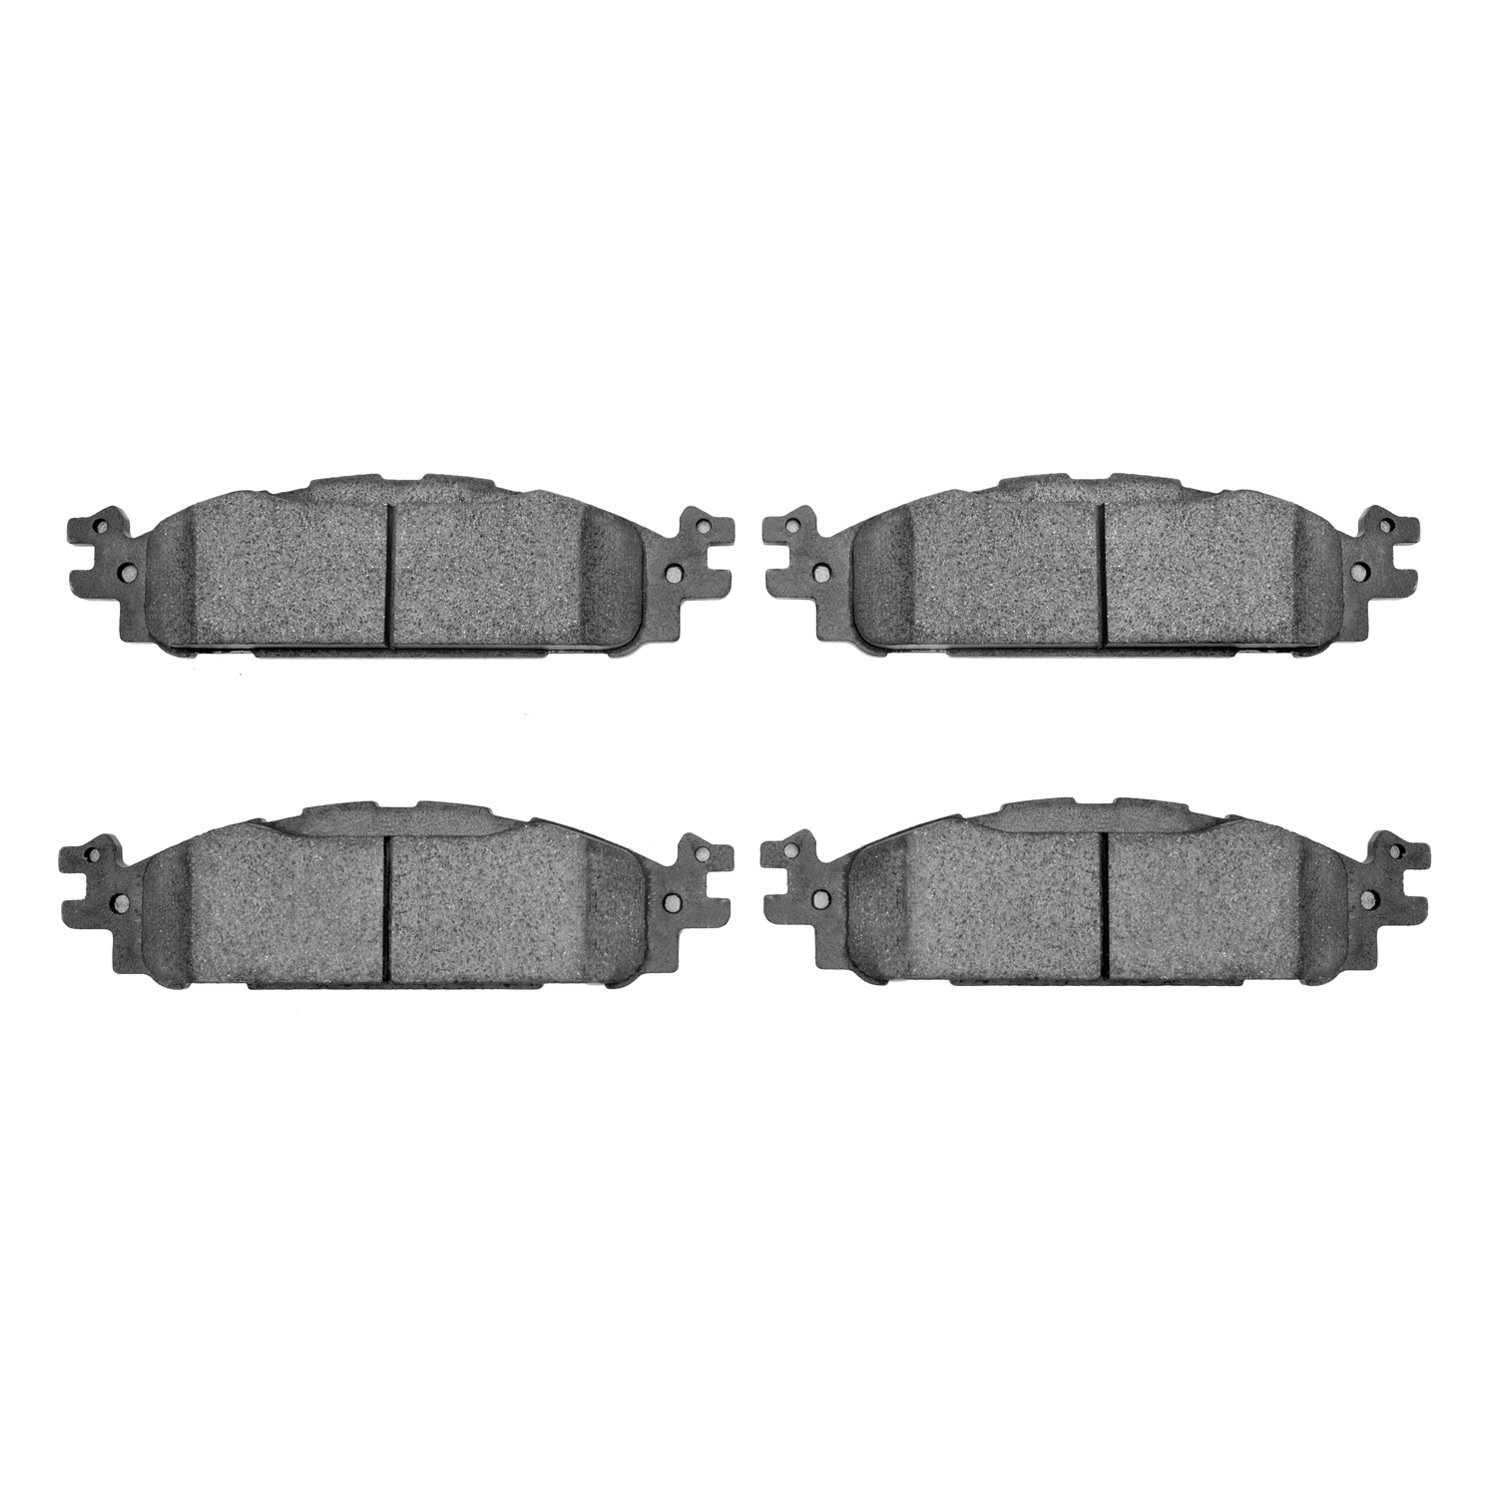 1310-1508-00 3000-Series Ceramic Brake Pads, 2009-2019 Ford/Lincoln/Mercury/Mazda, Position: Front